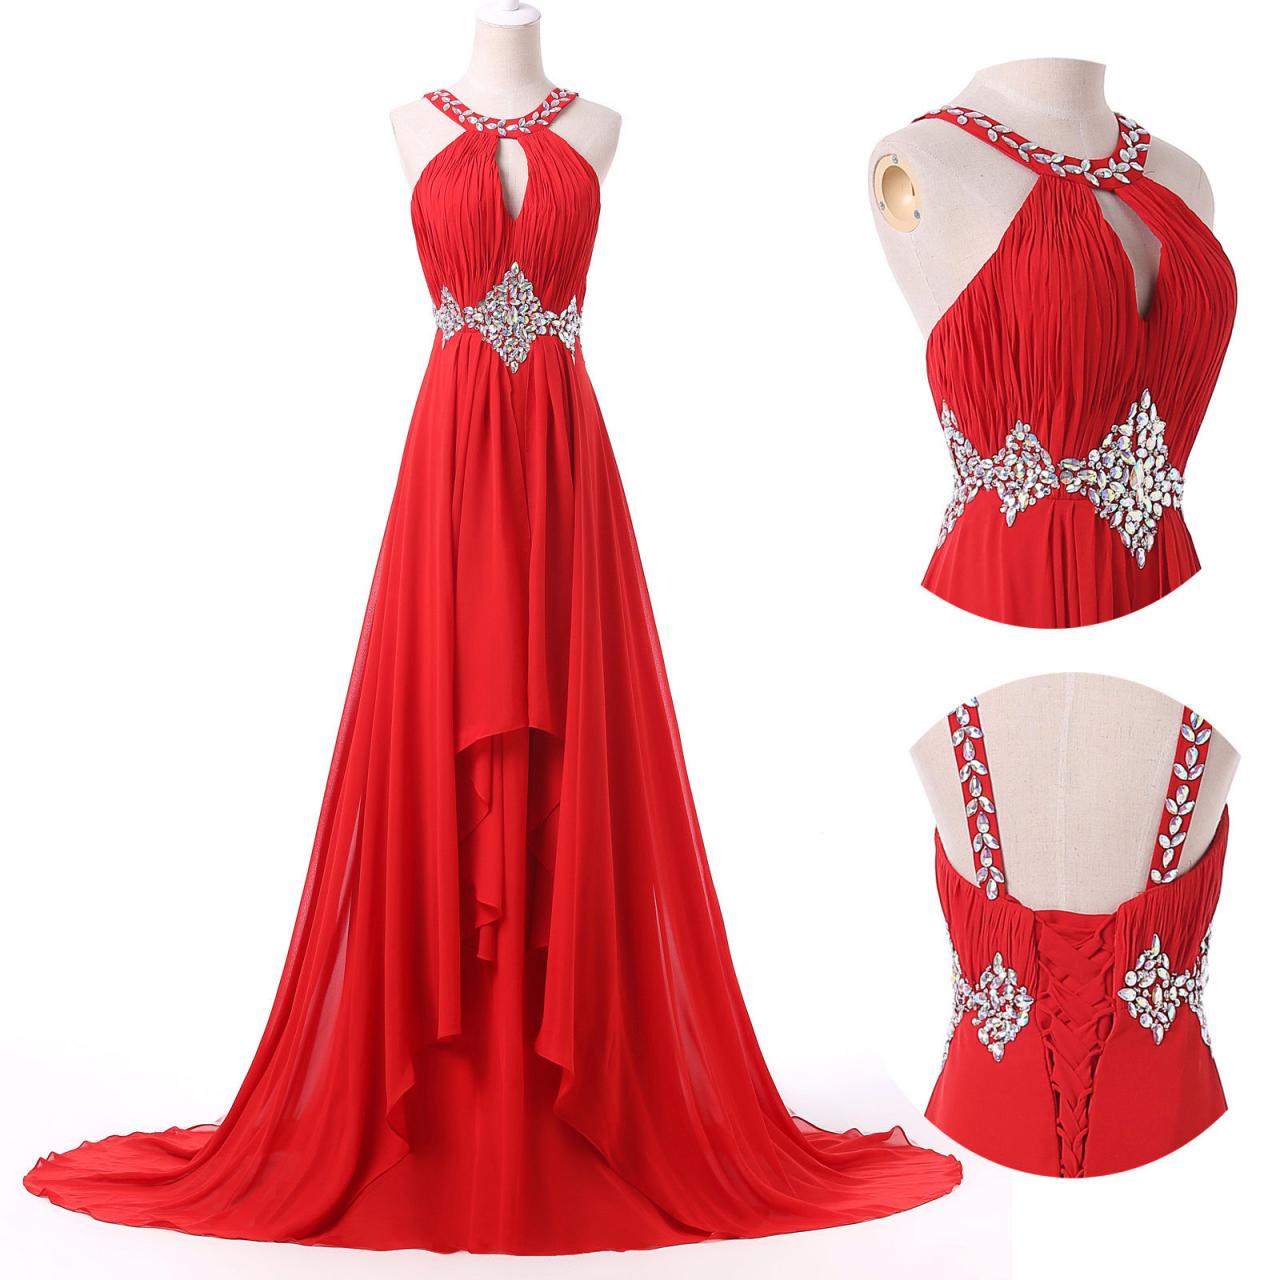 Red Floor Length Chiffon Prom Dress Featuring Ruched Halter Neck Bodice With Crystal Embellishments, Cutout Detailing And Lace-up Back